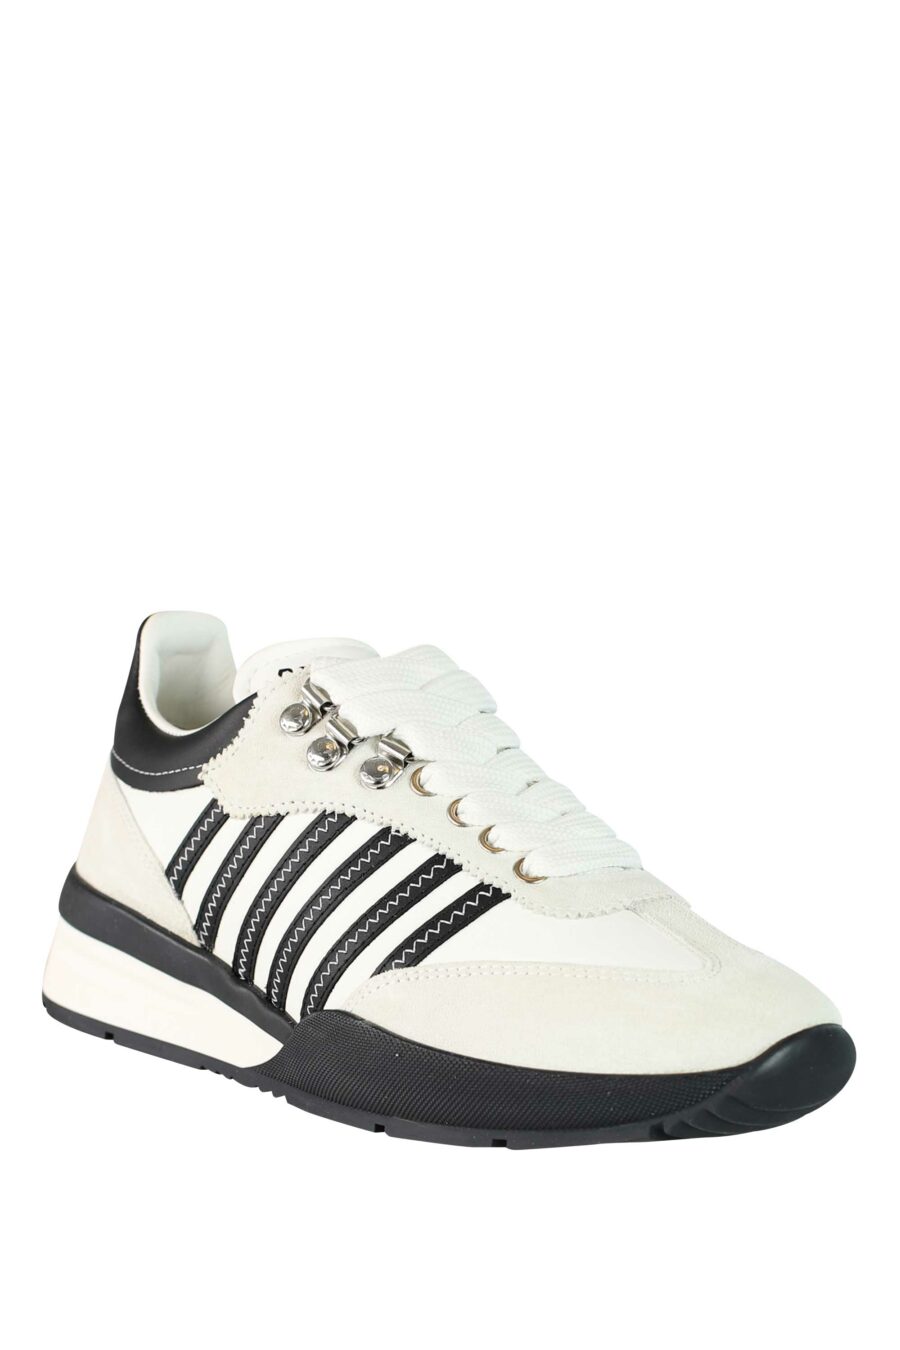 Trainers white mix "original legend" with two-tone sole and diagonal lines - 8055777186879 2